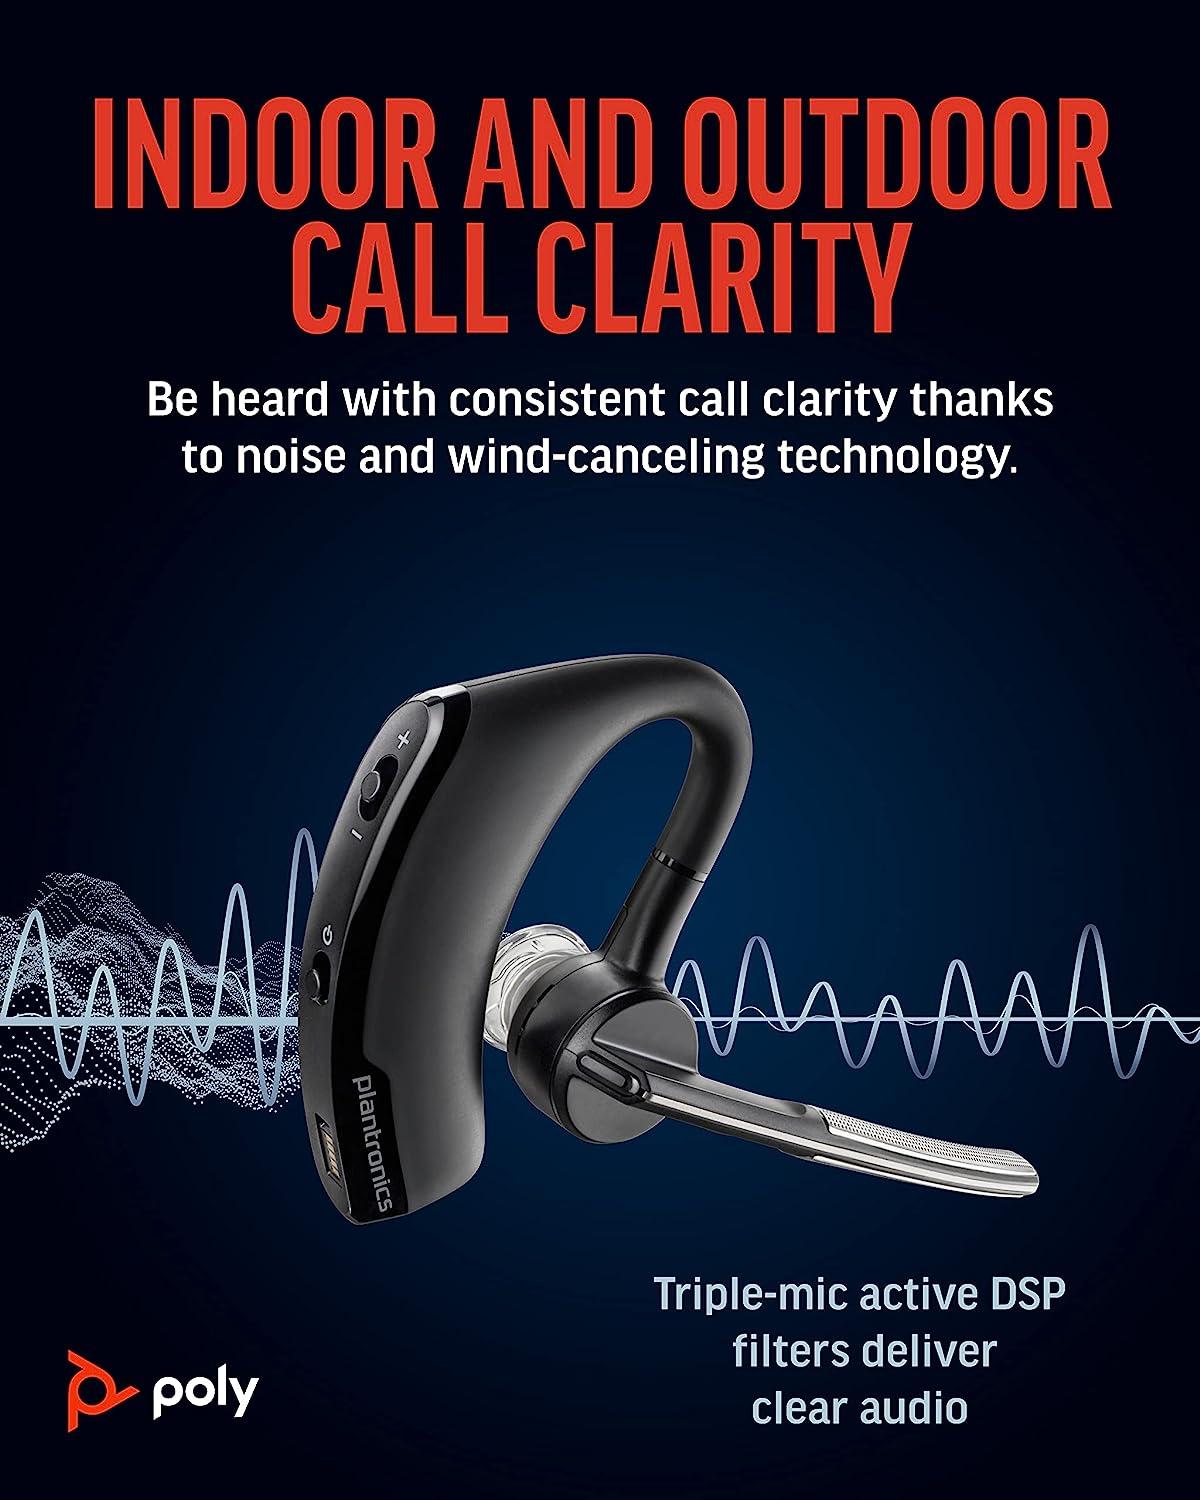 via Headset (Plantronics) to Buttons Mute w/Noise-Canceling Ergonomic Controls Legend Single-Ear - Mic -FFP Volume - Bluetooth - Wireless -Connect & Mobile/Tablet Voyager Voice Design - Bluetooth Poly